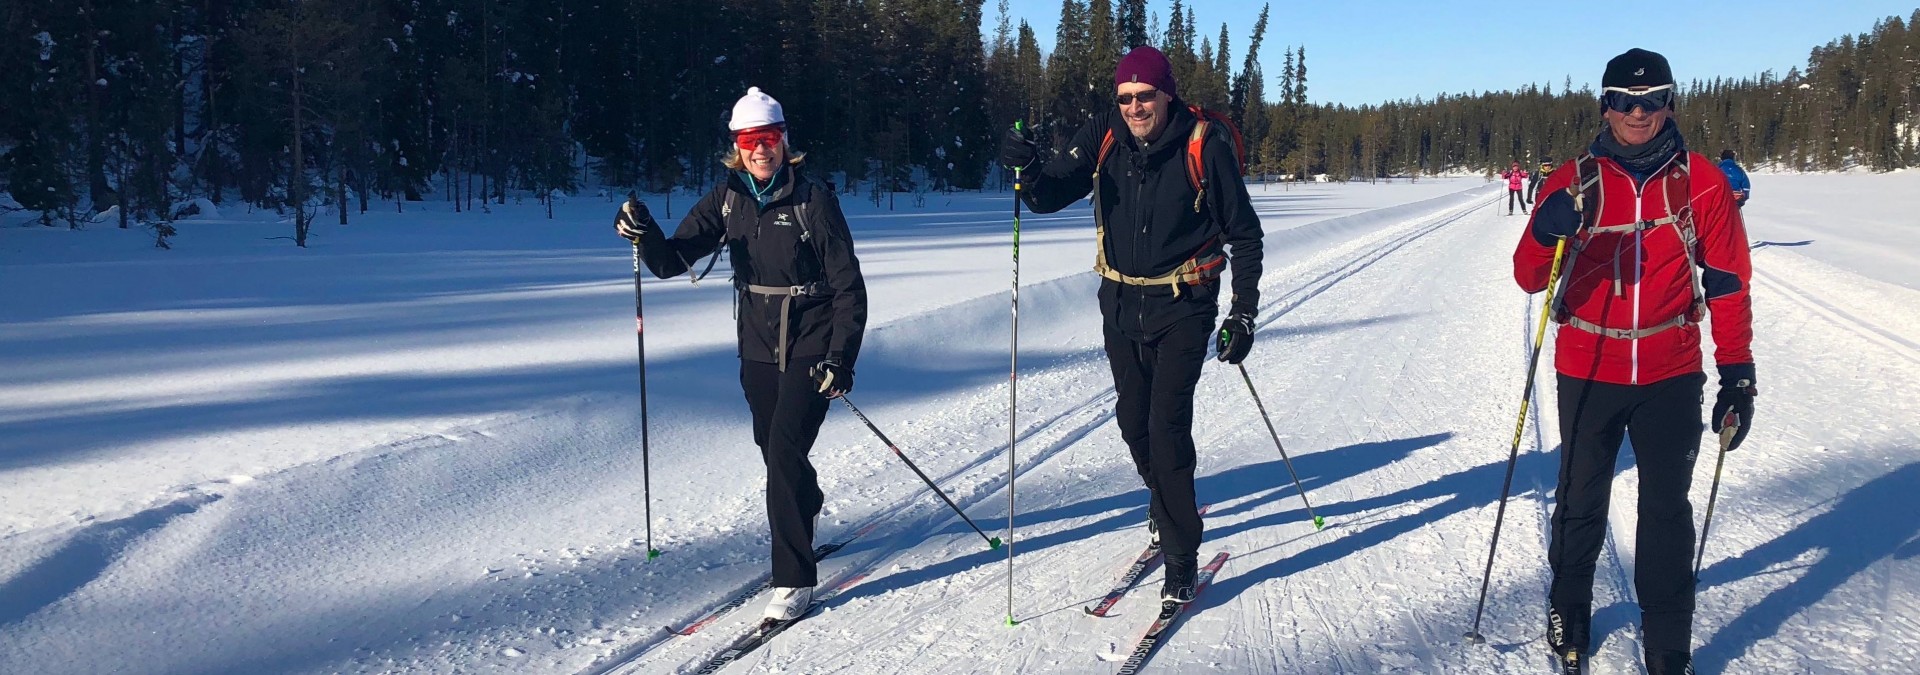 Cross country skiing in Lapland